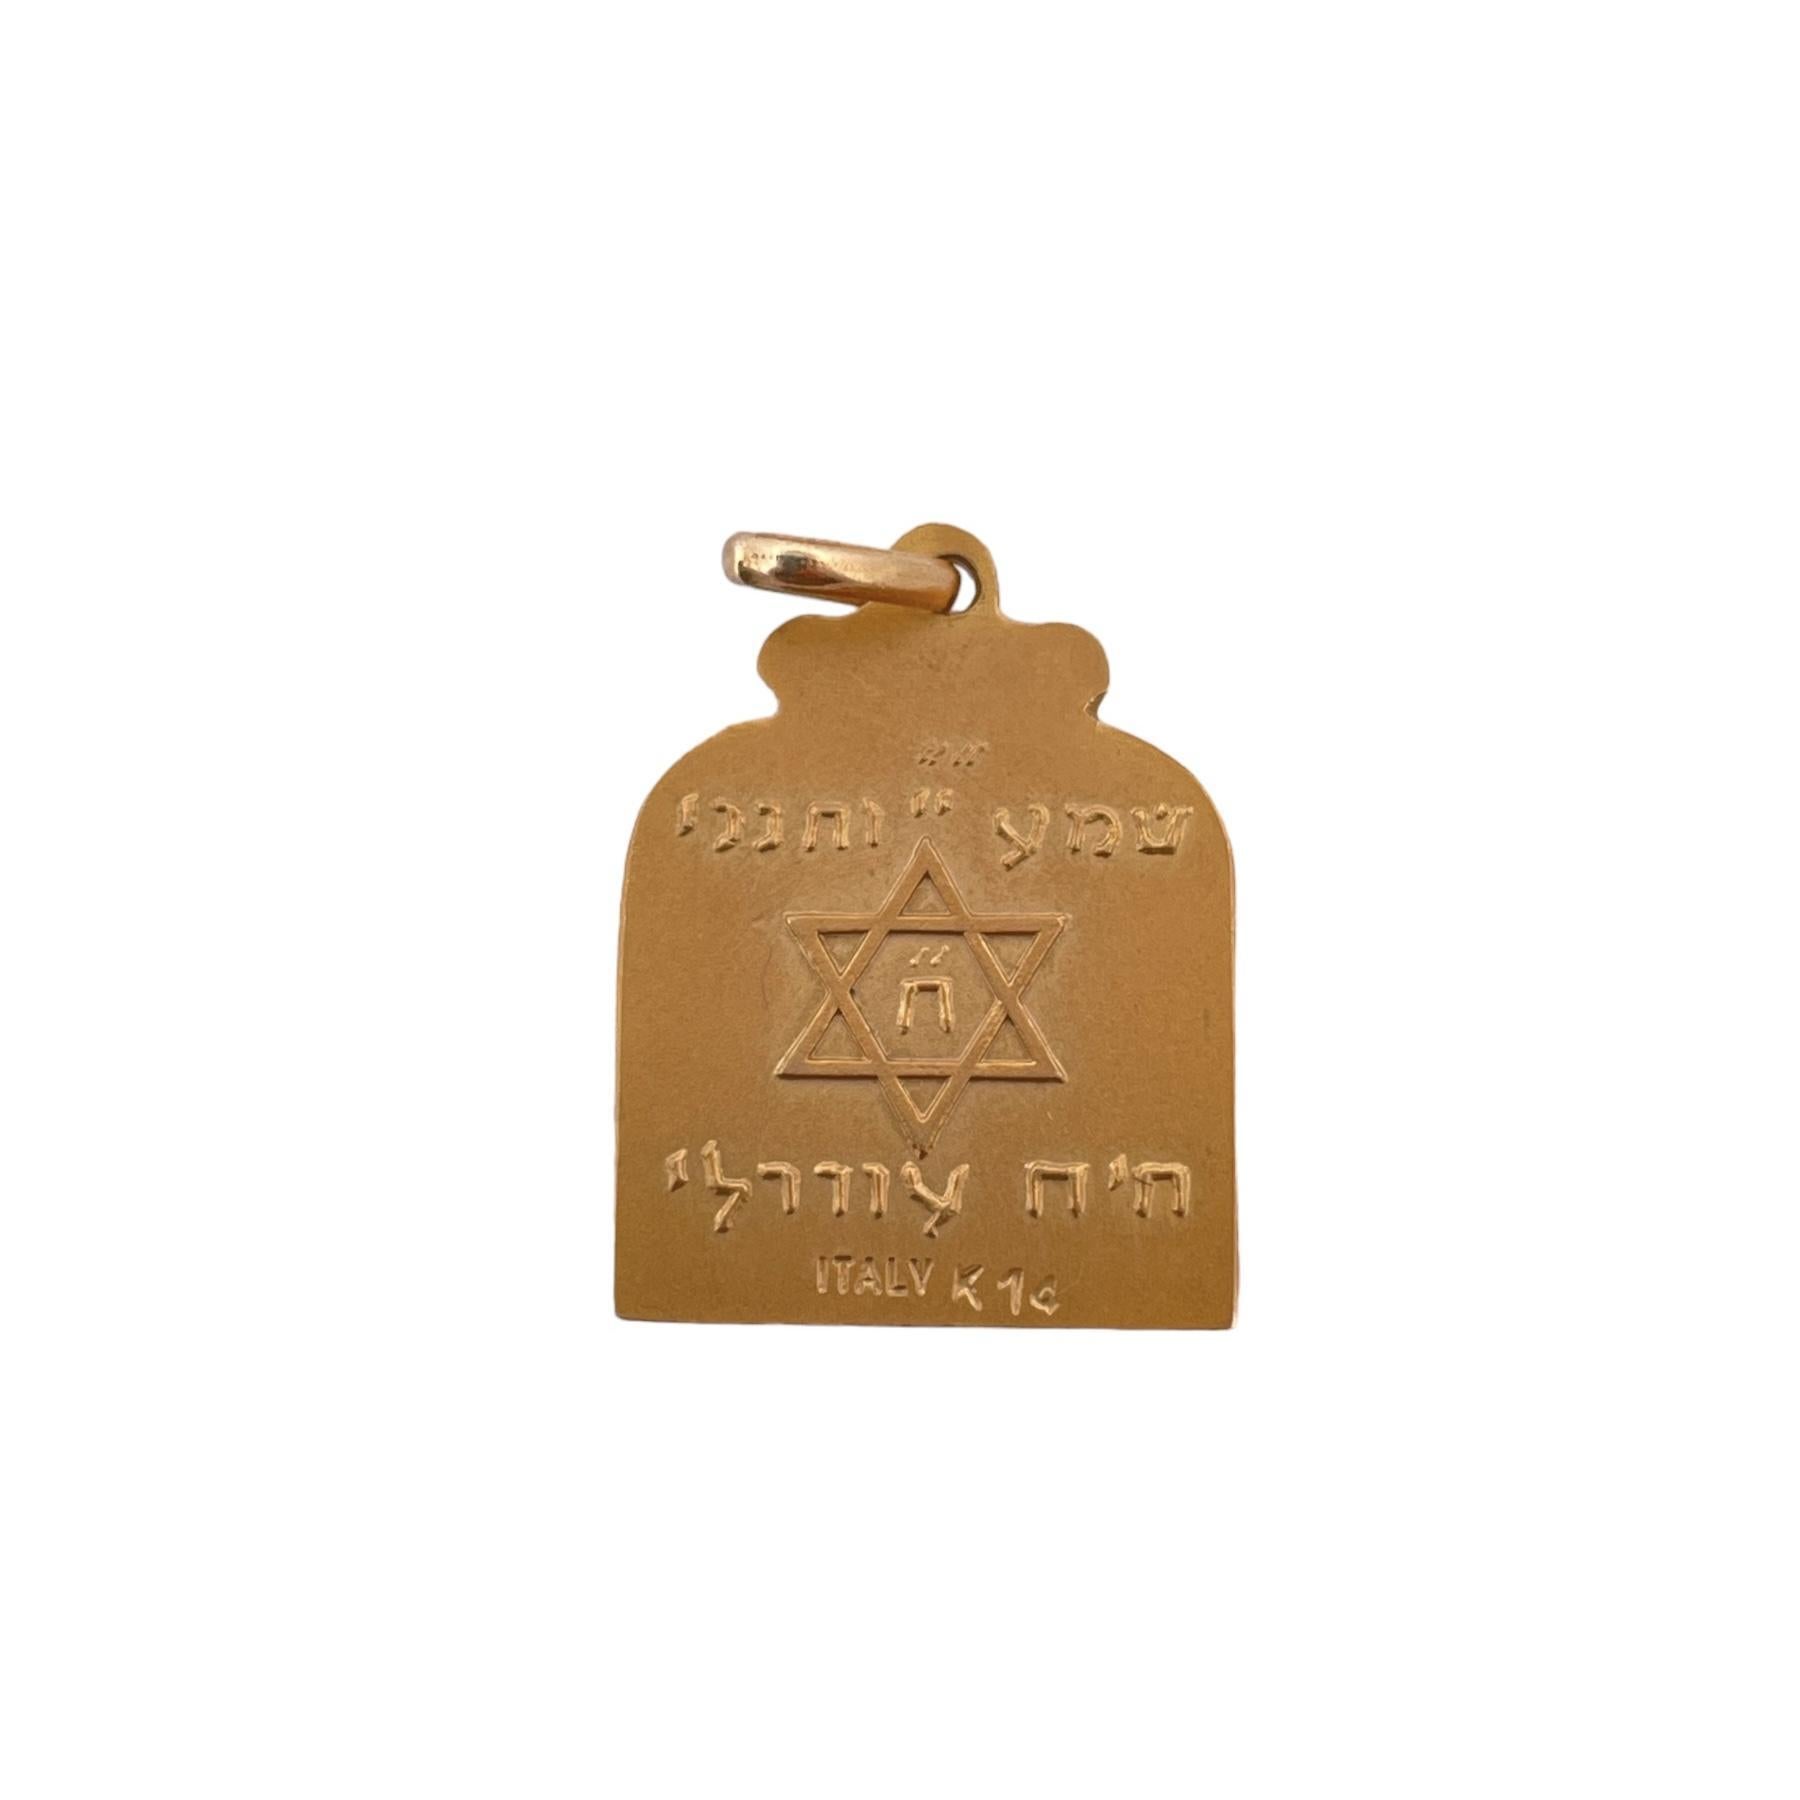 Discover a piece of spiritual heritage with our Timeless 10 Commandments Pendant, a symbol of faith and guidance, expertly crafted in 14K yellow gold. This meaningful pendant is a cherished reminder of the moral principles that have shaped